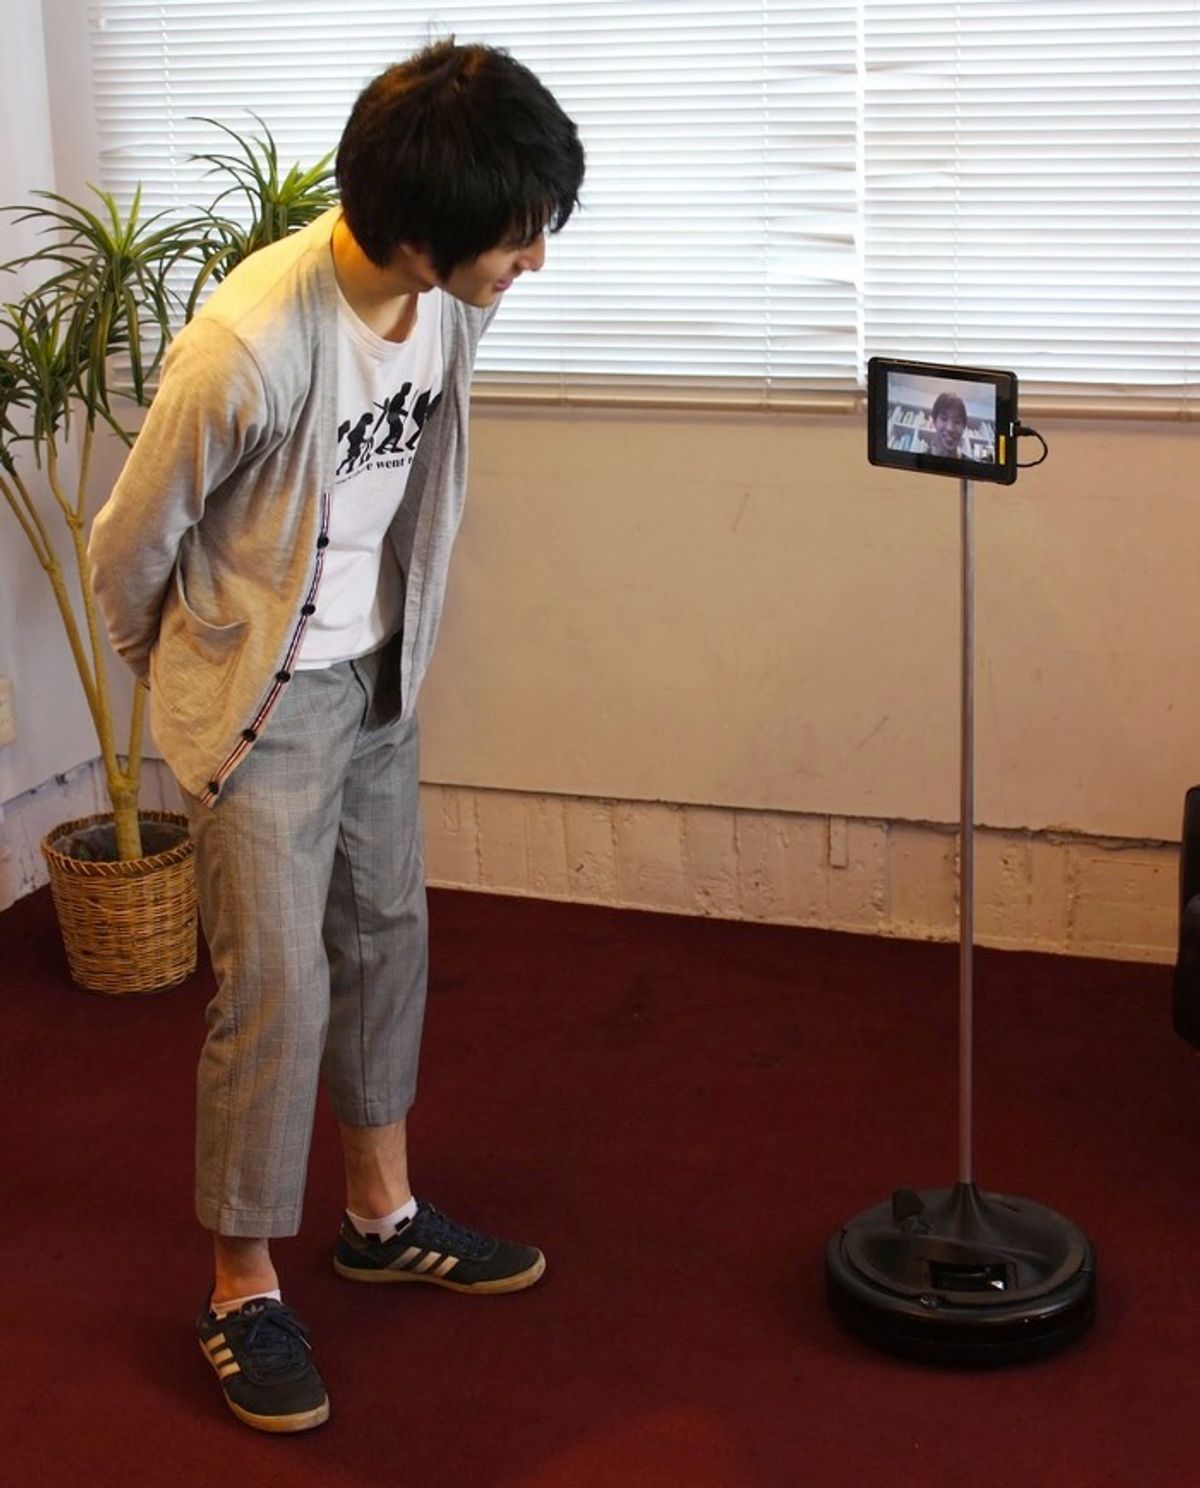 Telemba Turns Your Old Roomba and Tablet Into a Telepresence Robot